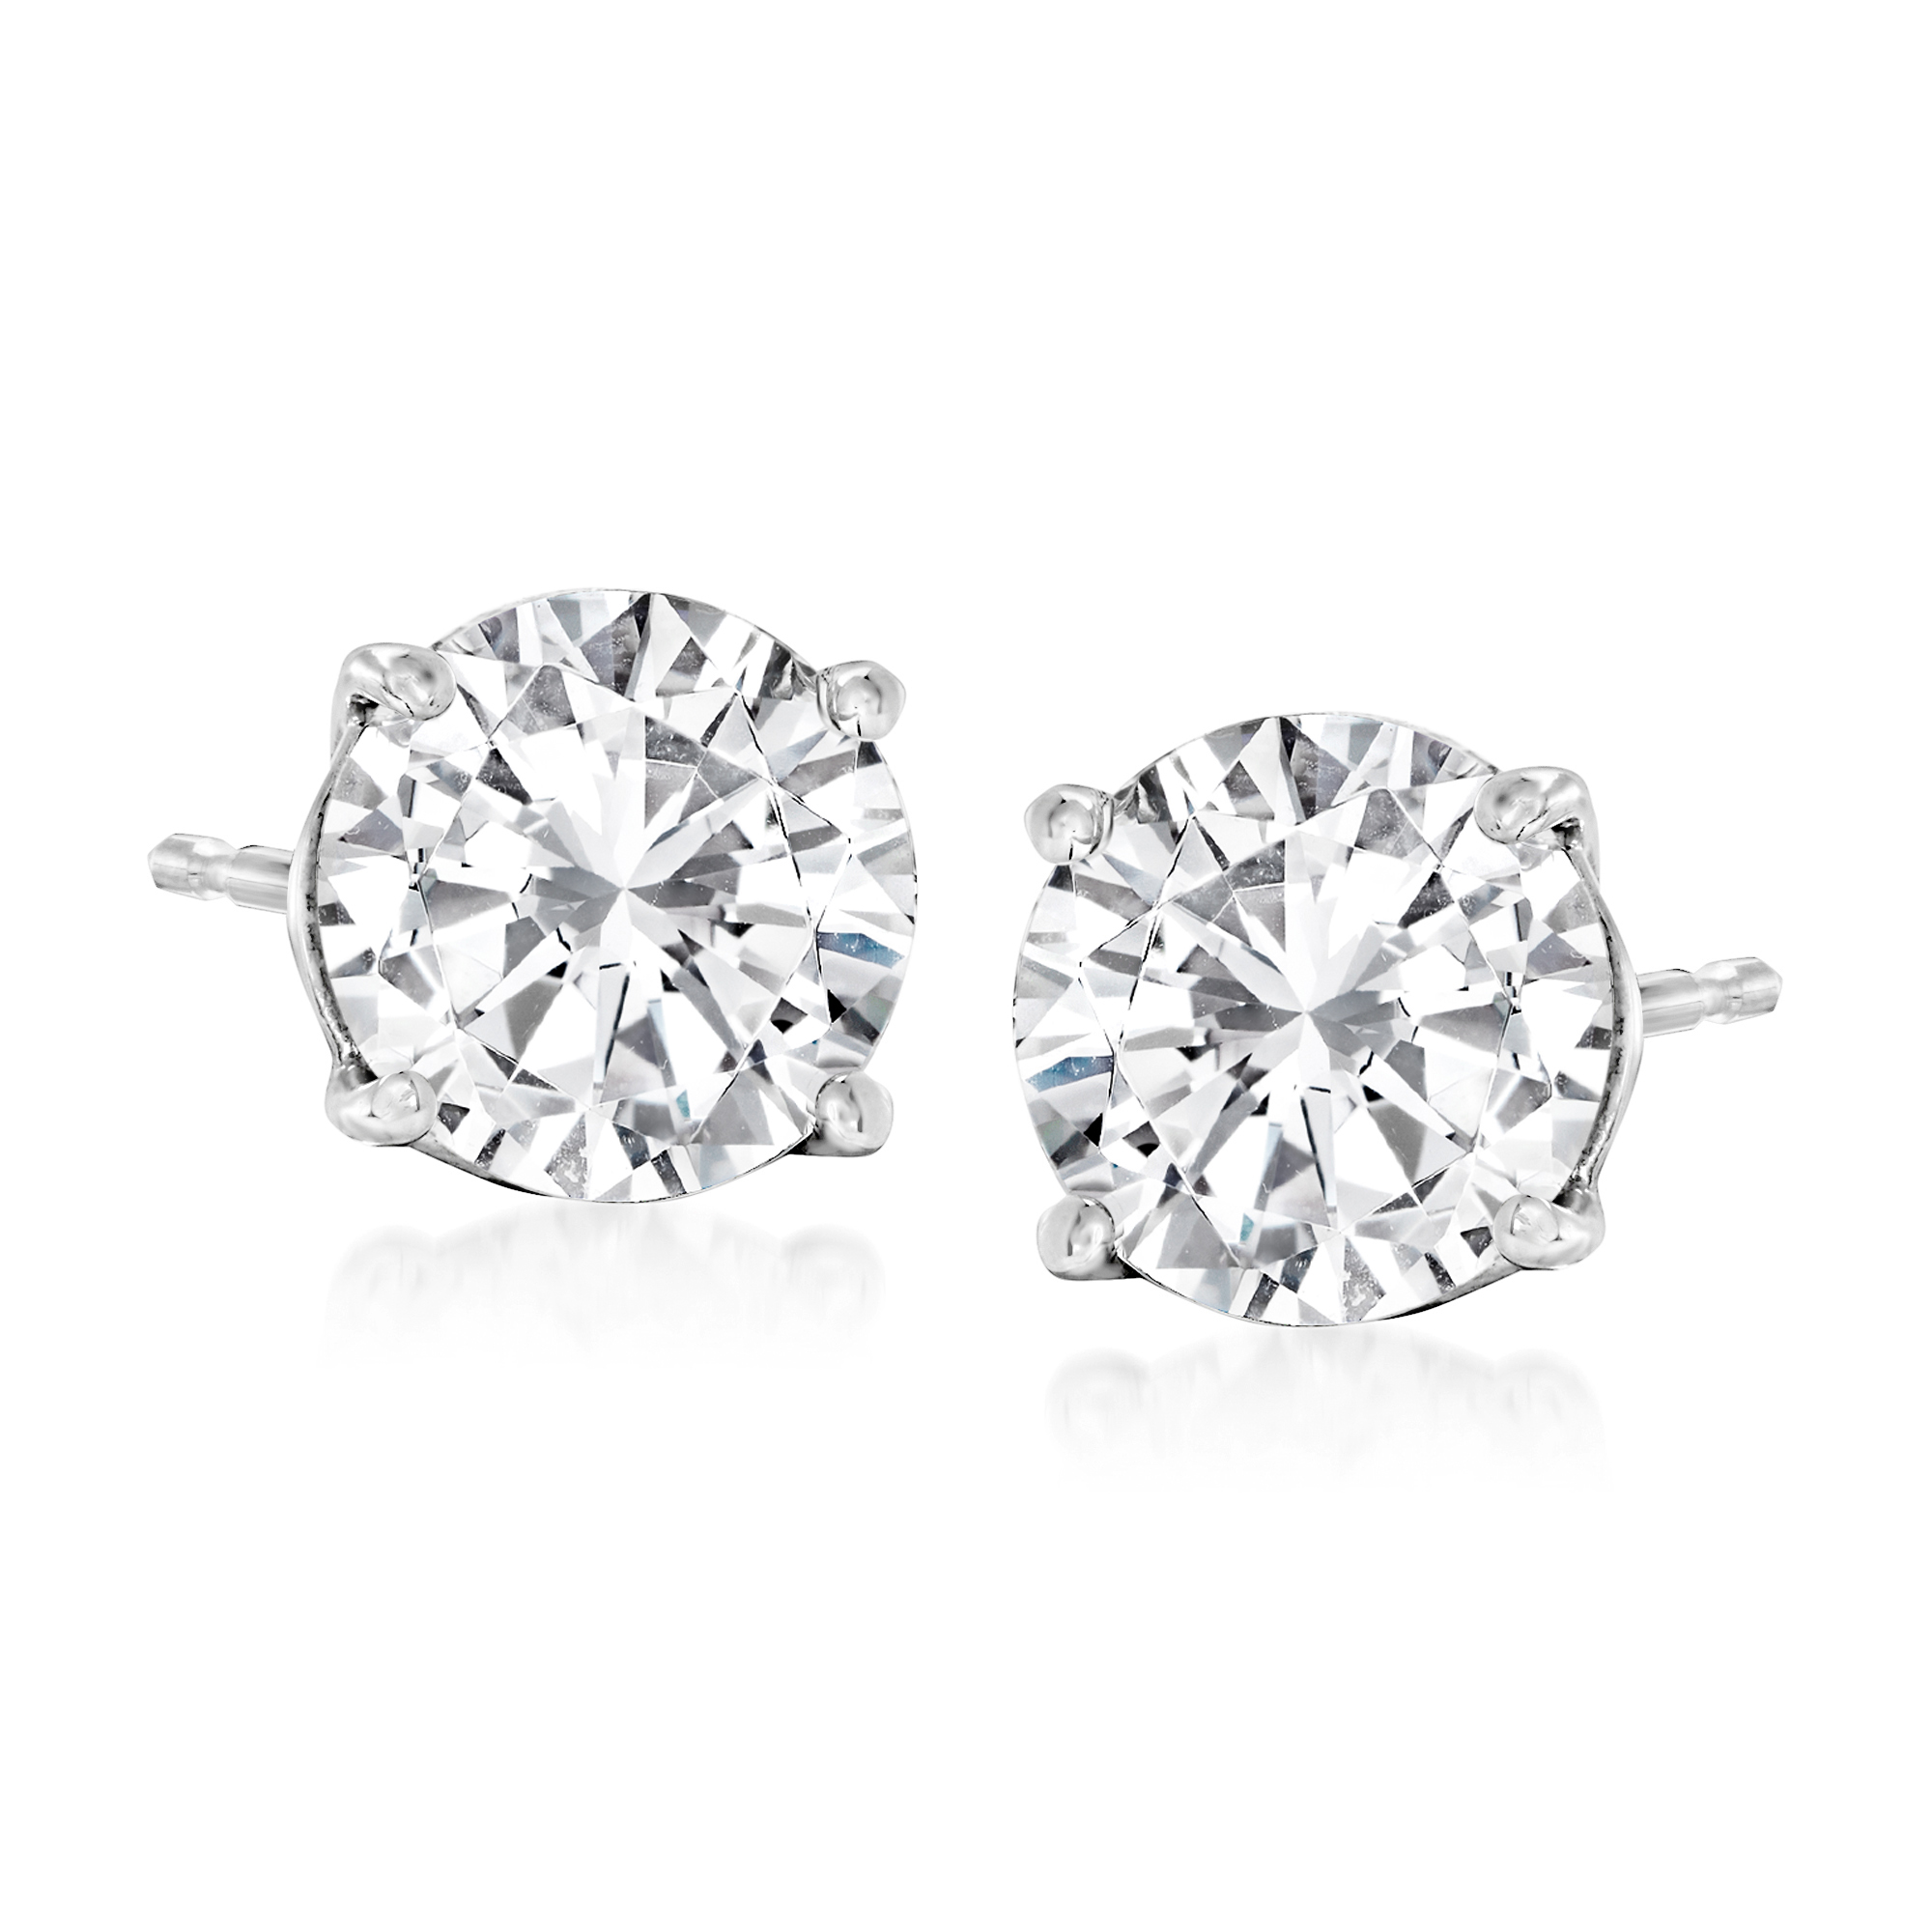 7.00CT BRILLIANT CREATED DIAMOND EARRINGS 14K SOLID YELLOW GOLD SOLITAIRE STUDS 